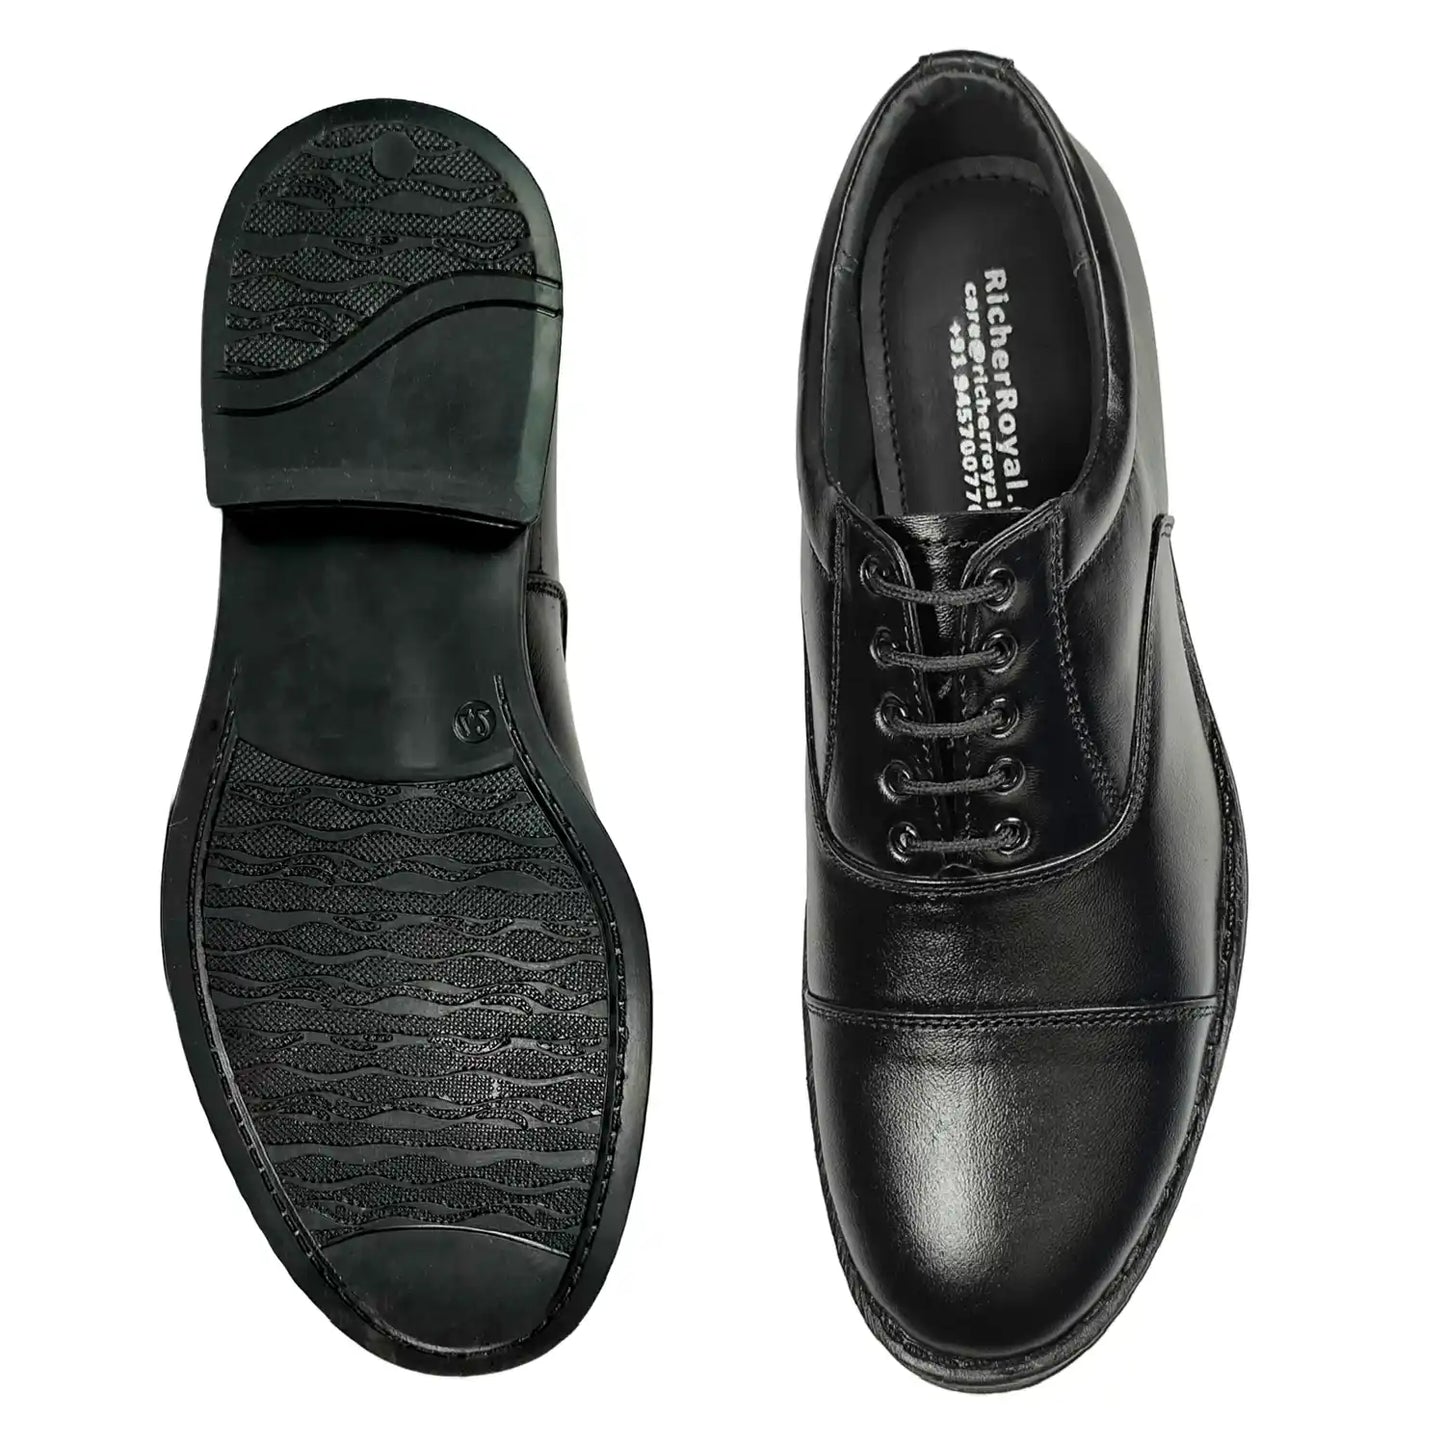 Police Uniform Shoes Pure Leather Oxford for Men